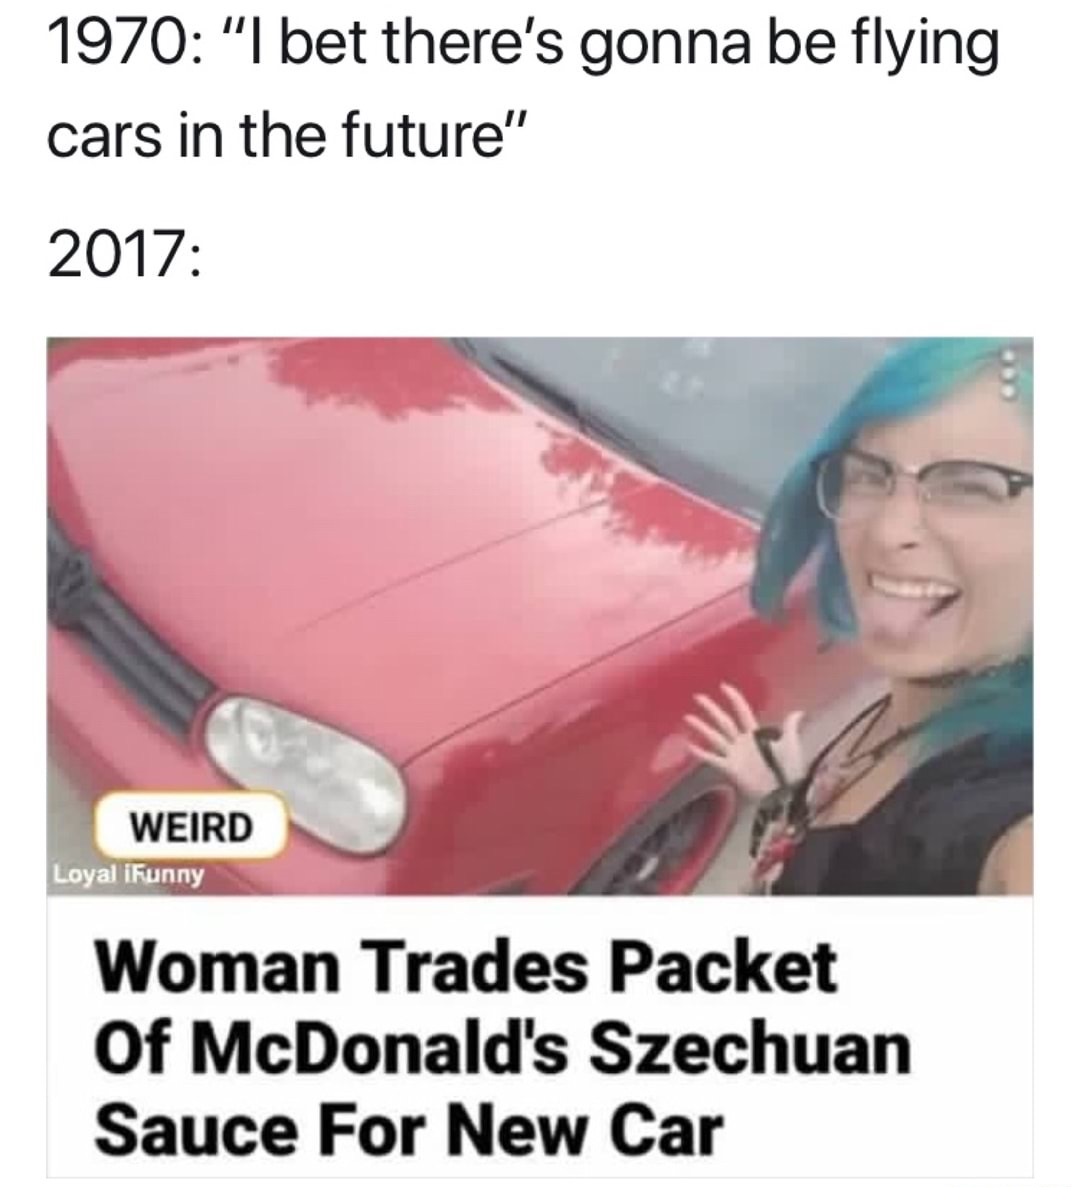 photo caption - 1970 "I bet there's gonna be flying cars in the future" 2017 Weird Loyal iFunny Woman Trades Packet Of McDonald's Szechuan Sauce For New Car